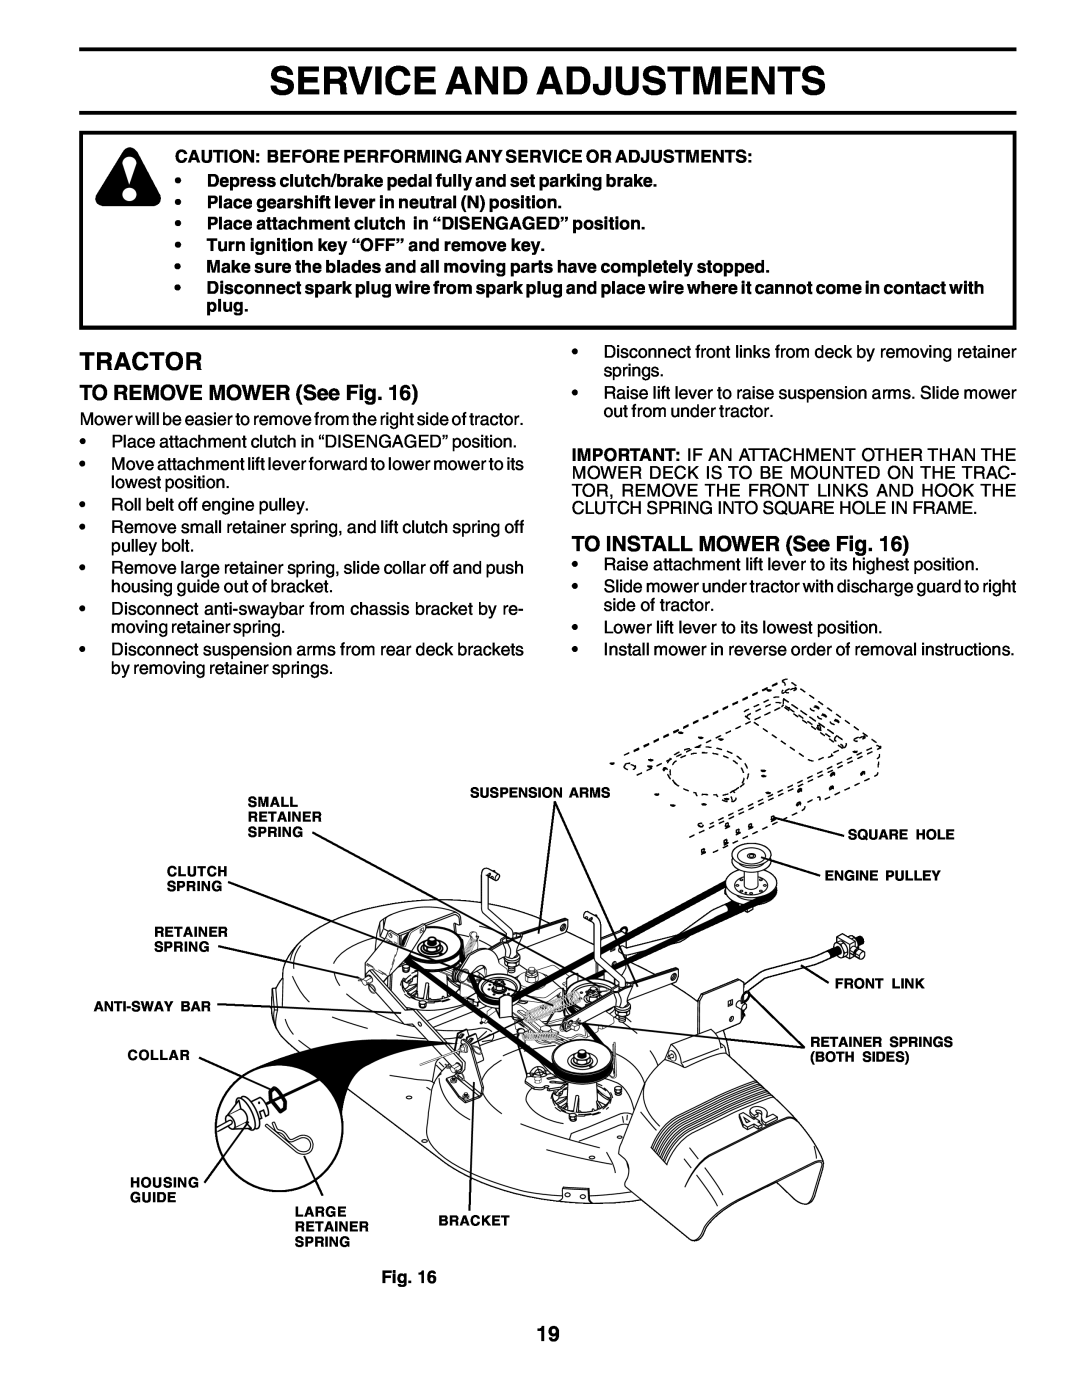 Poulan PO14542C manual Service And Adjustments, Tractor, TO REMOVE MOWER See Fig, TO INSTALL MOWER See Fig 